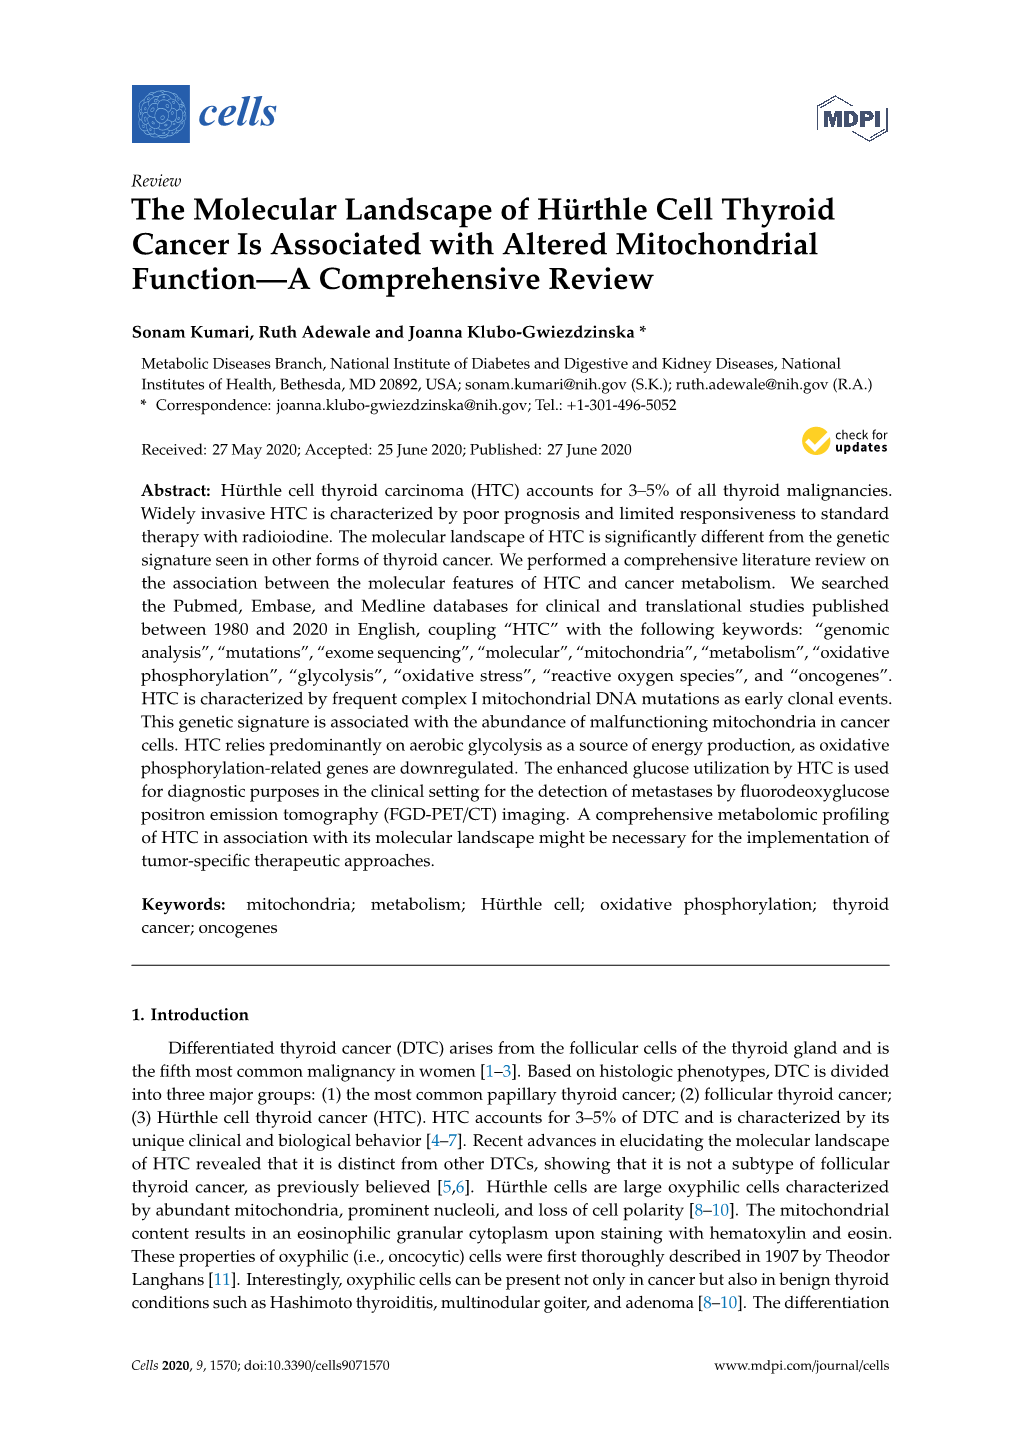 The Molecular Landscape of Hürthle Cell Thyroid Cancer Is Associated with Altered Mitochondrial Function—A Comprehensive Review